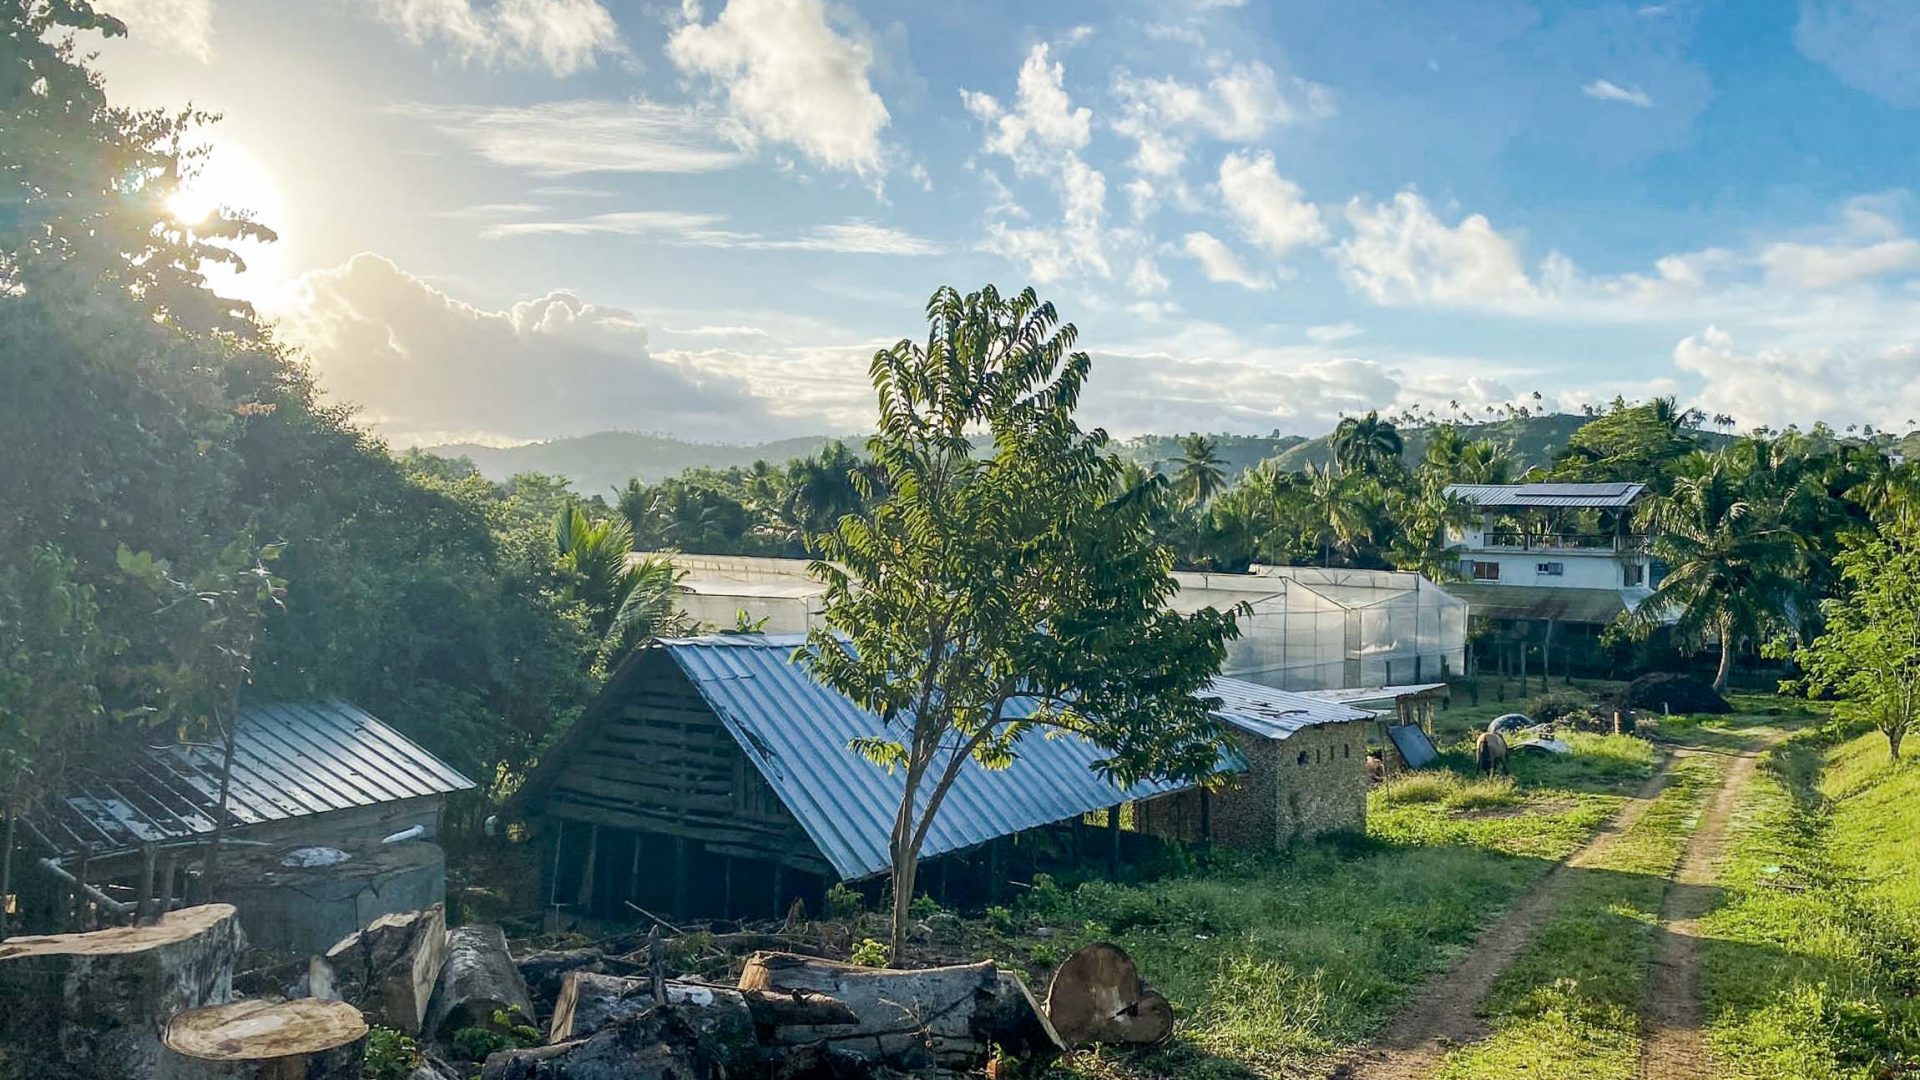 Meet the dedicated team who are transforming a Dominican Republic farm into an eco-haven